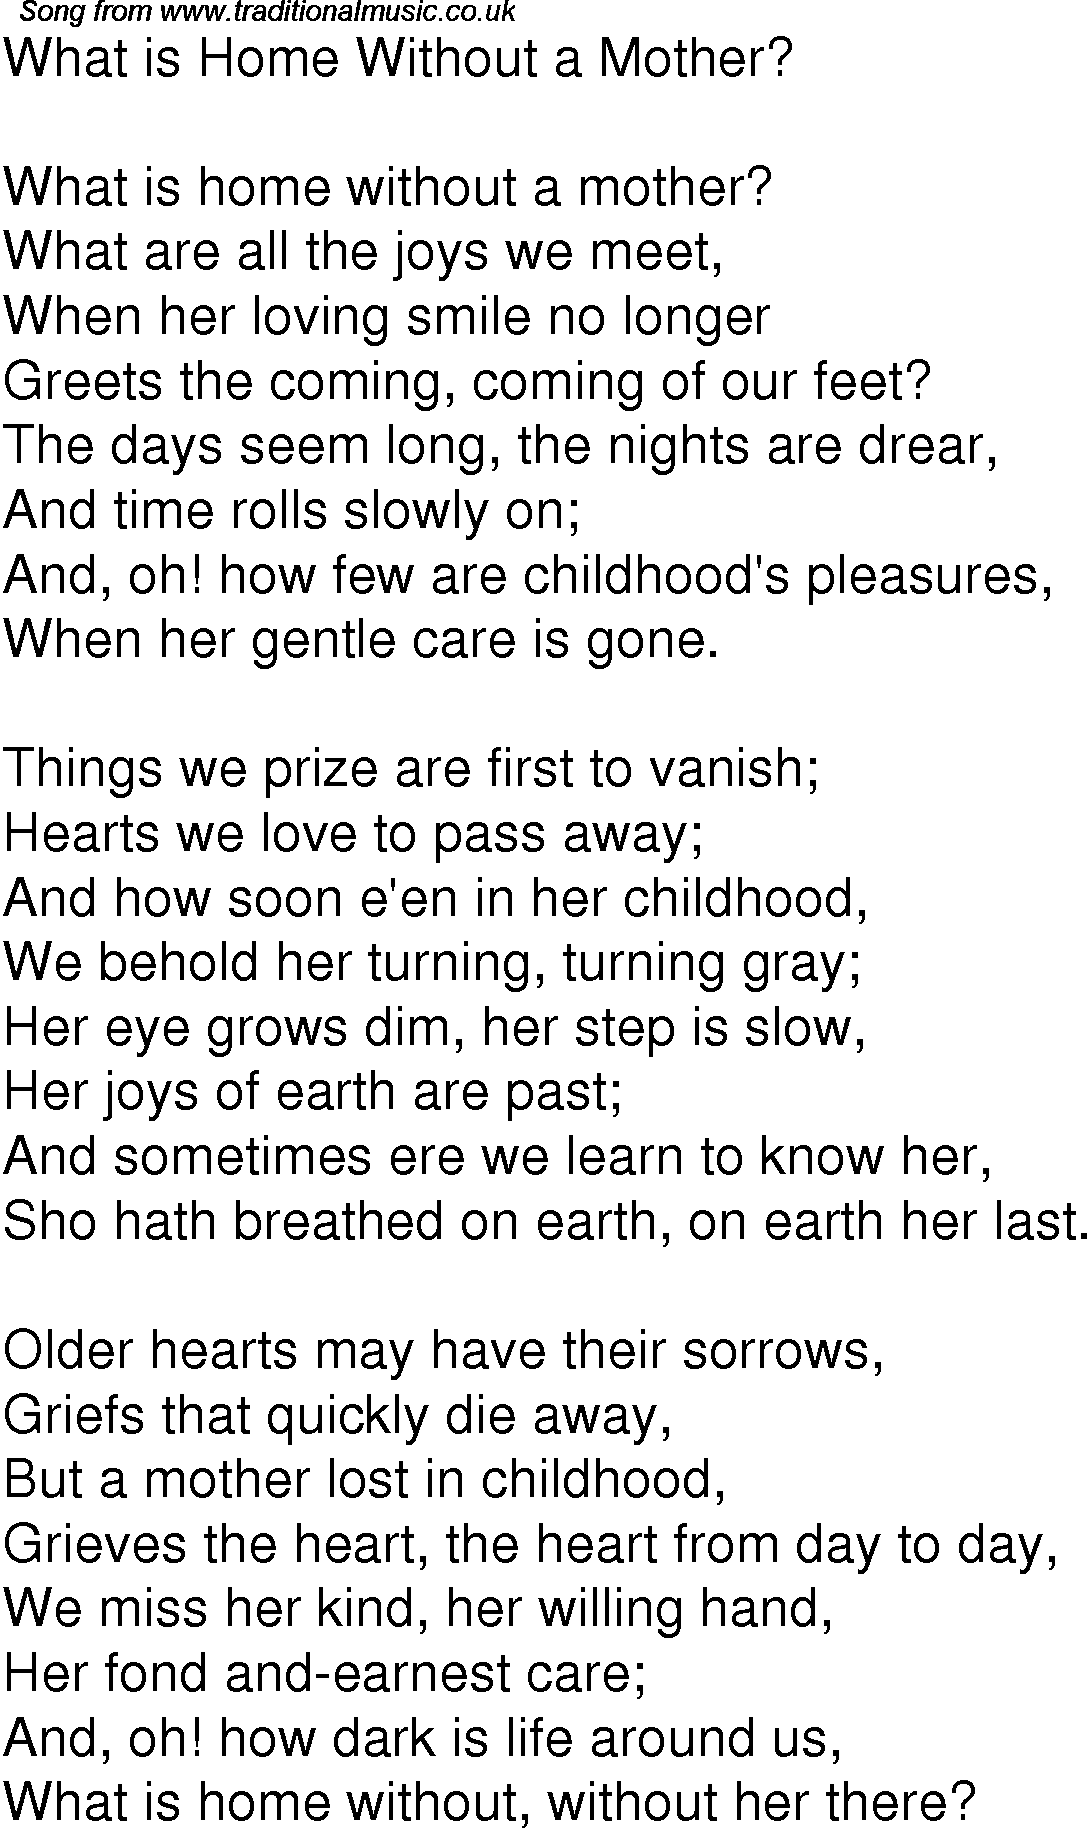 Old Time Song Lyrics For 03 What Is Home Without A Mother